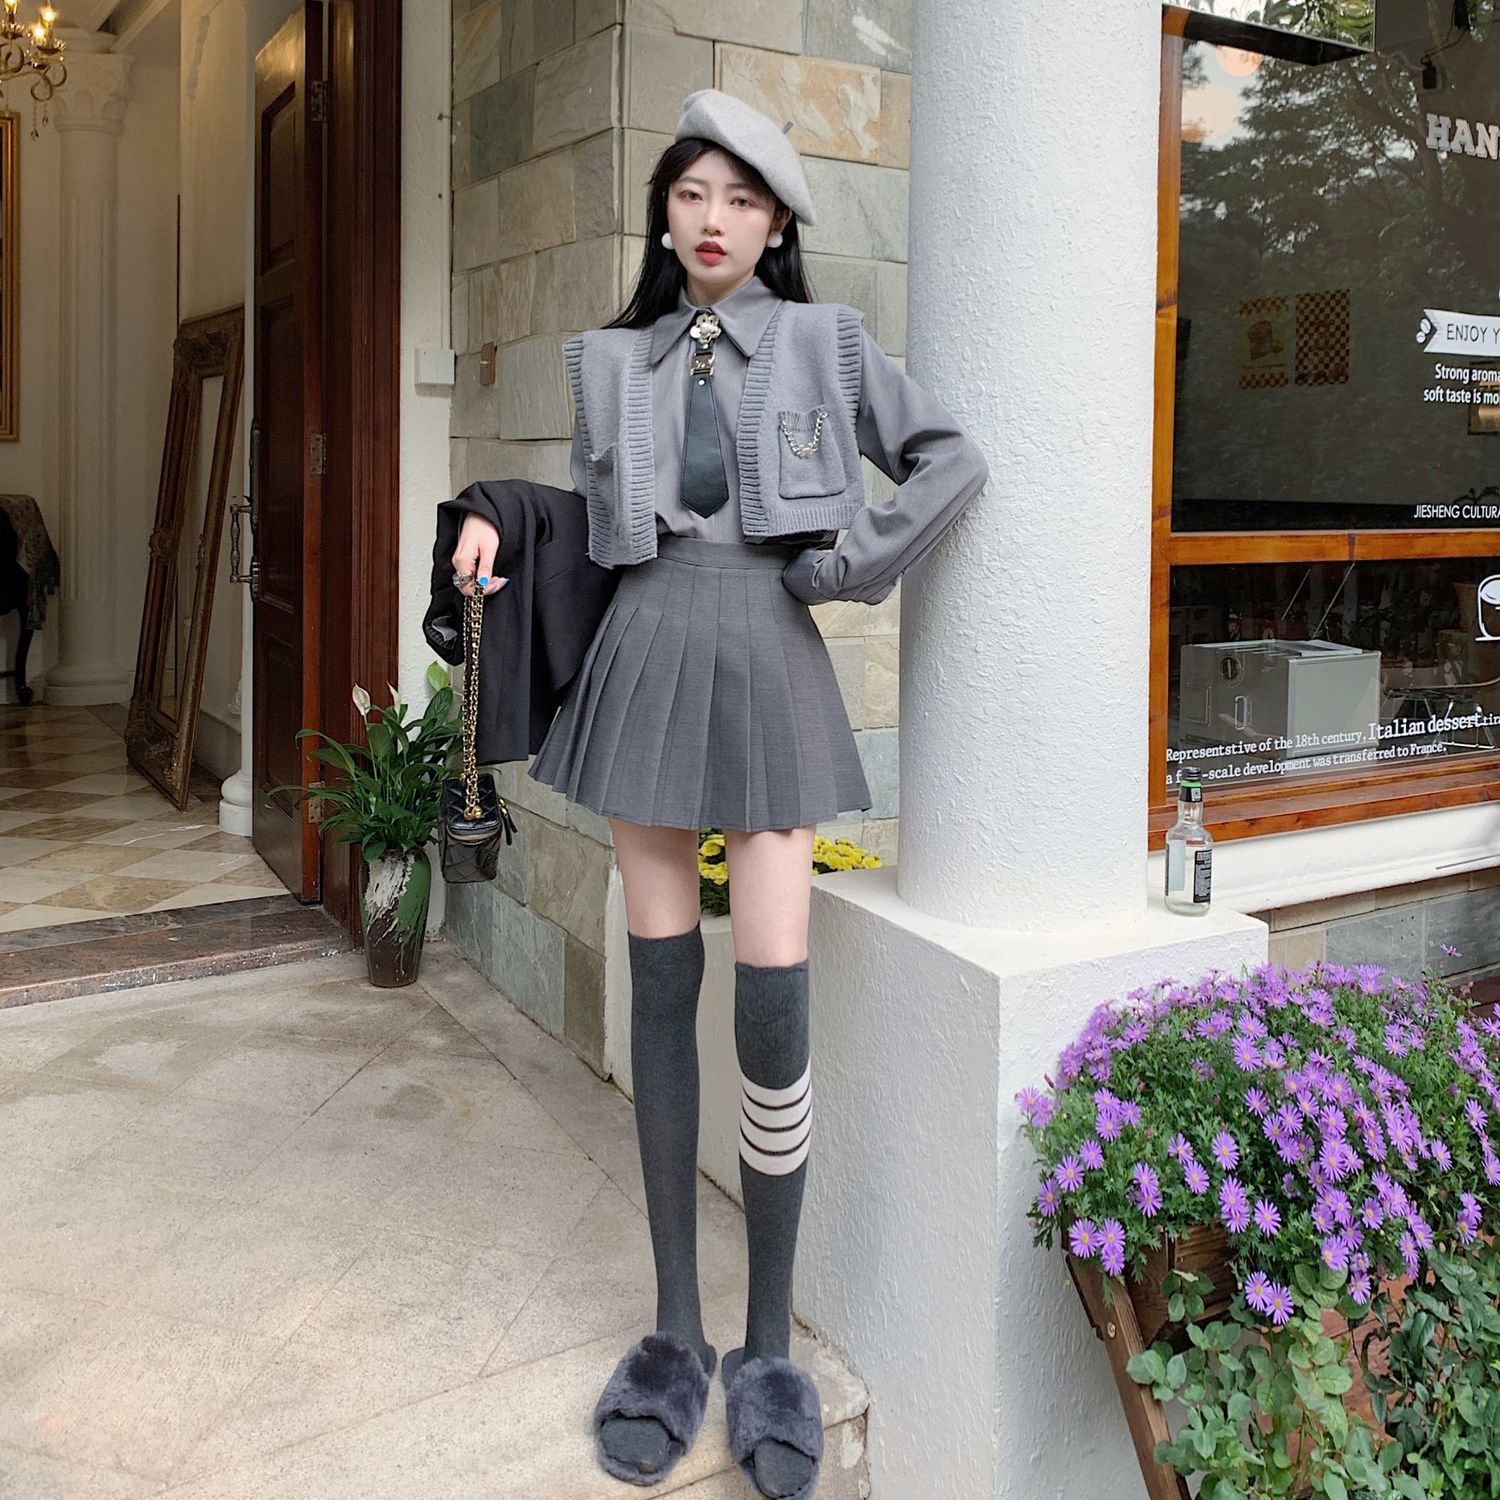 Salt series small suit 2022 new college wind tie shirt sweater vest pleated skirt two-piece suit female